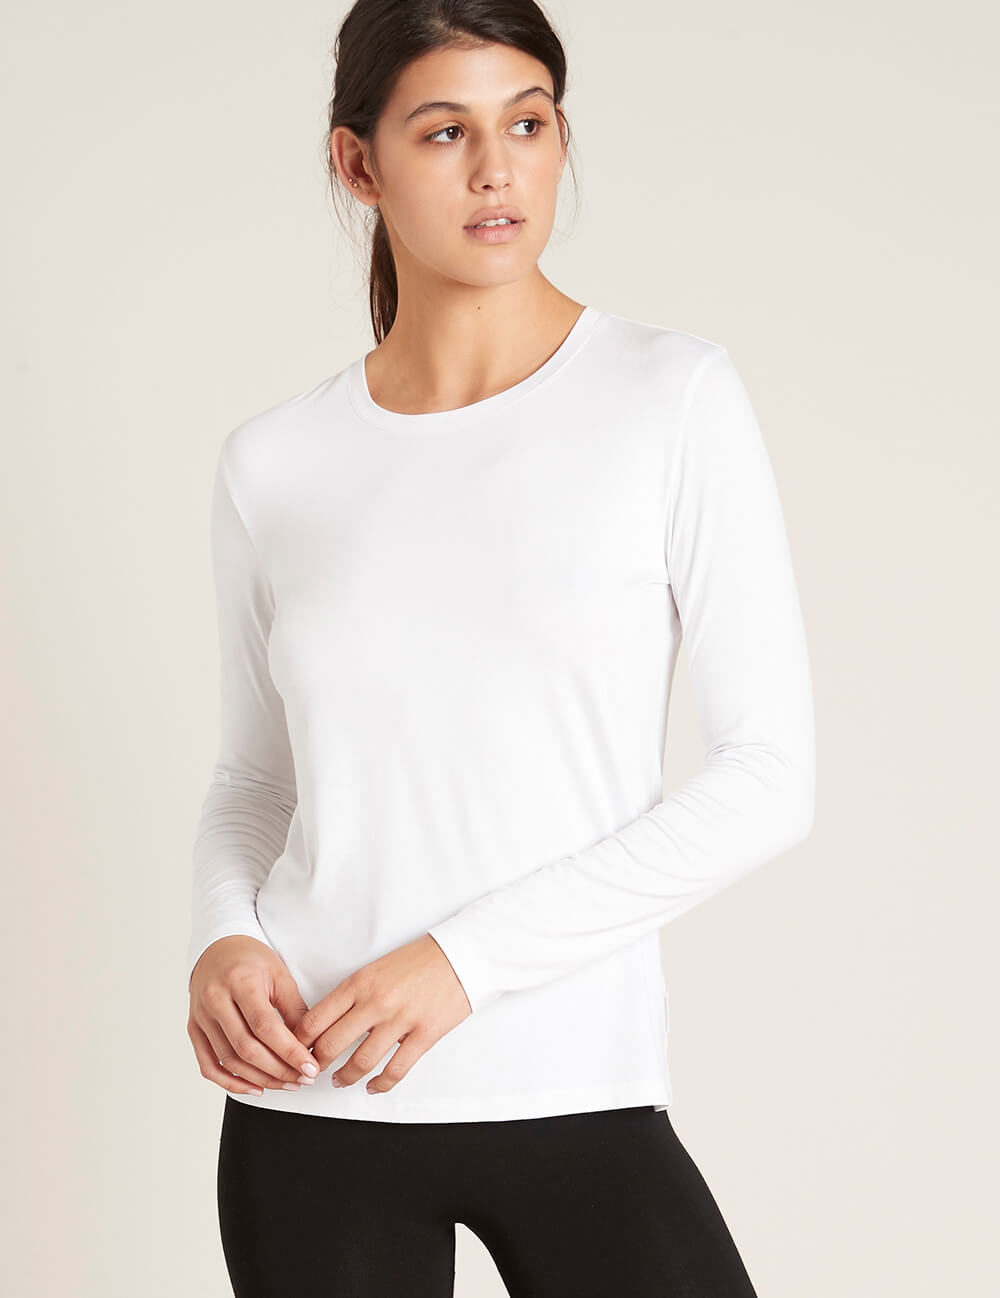 Boody Women's Long Sleeve Round Neck T-Shirt White Front